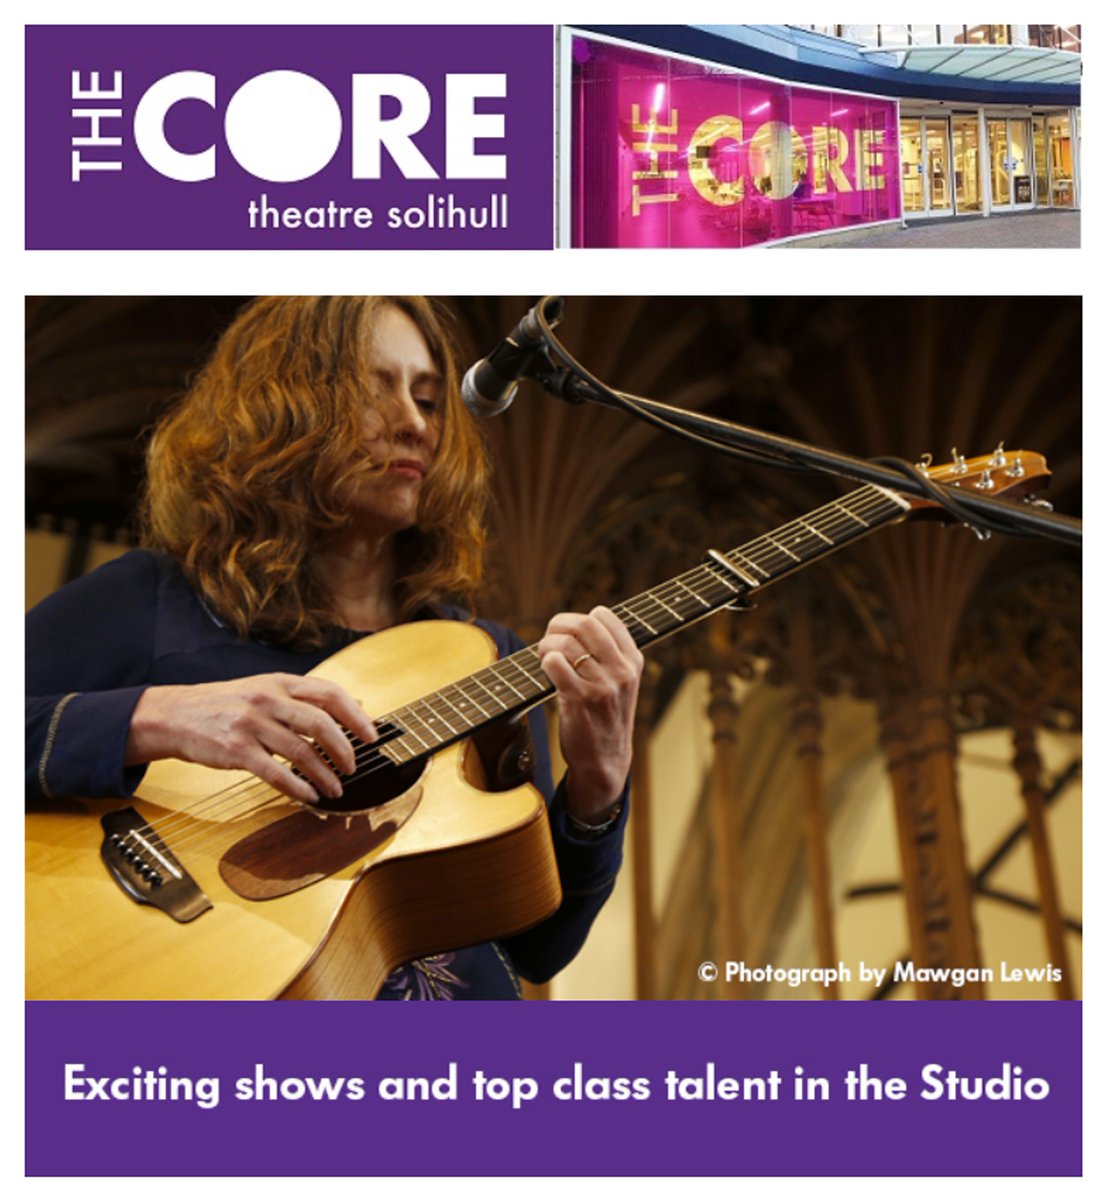 Our latest newsletter is out today, featuring exciting new shows in the Studio and info on our current Courtyard Gallery exhibition. Read it here 👉 bit.ly/3TUQOy2 Sign up to receive regular updates at thecoretheatresolihull.co.uk/newsletter/